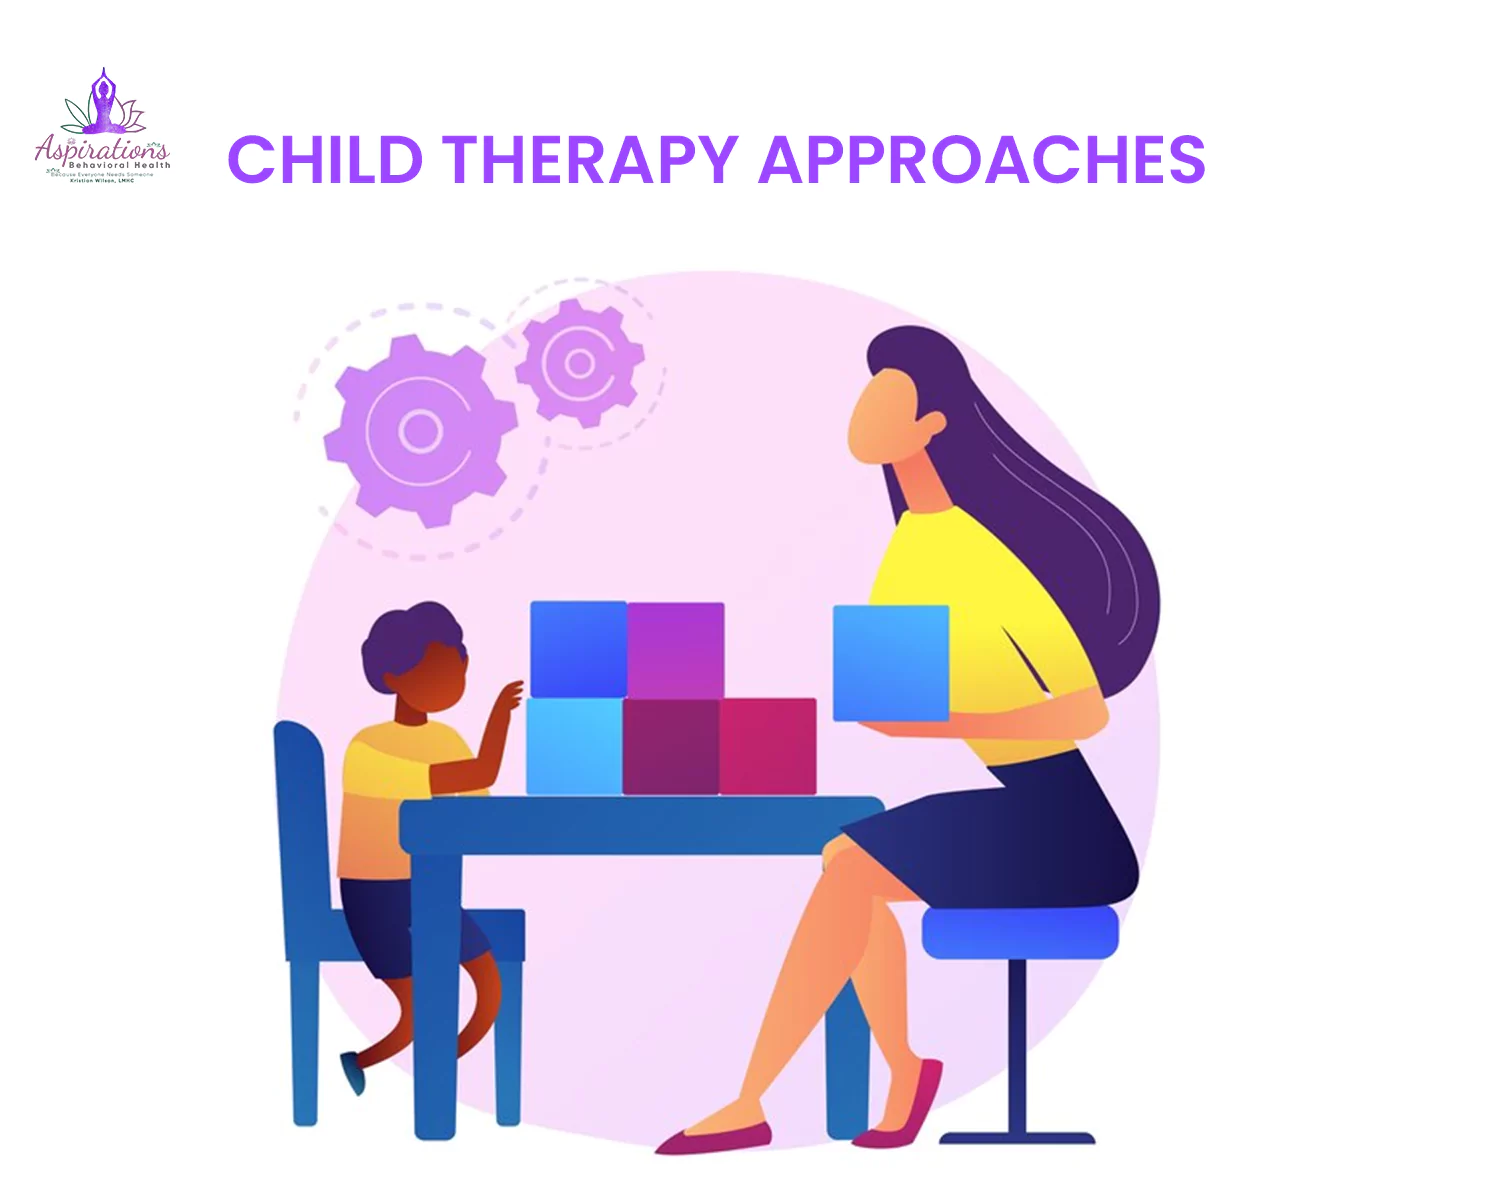 Child Therapy Approaches